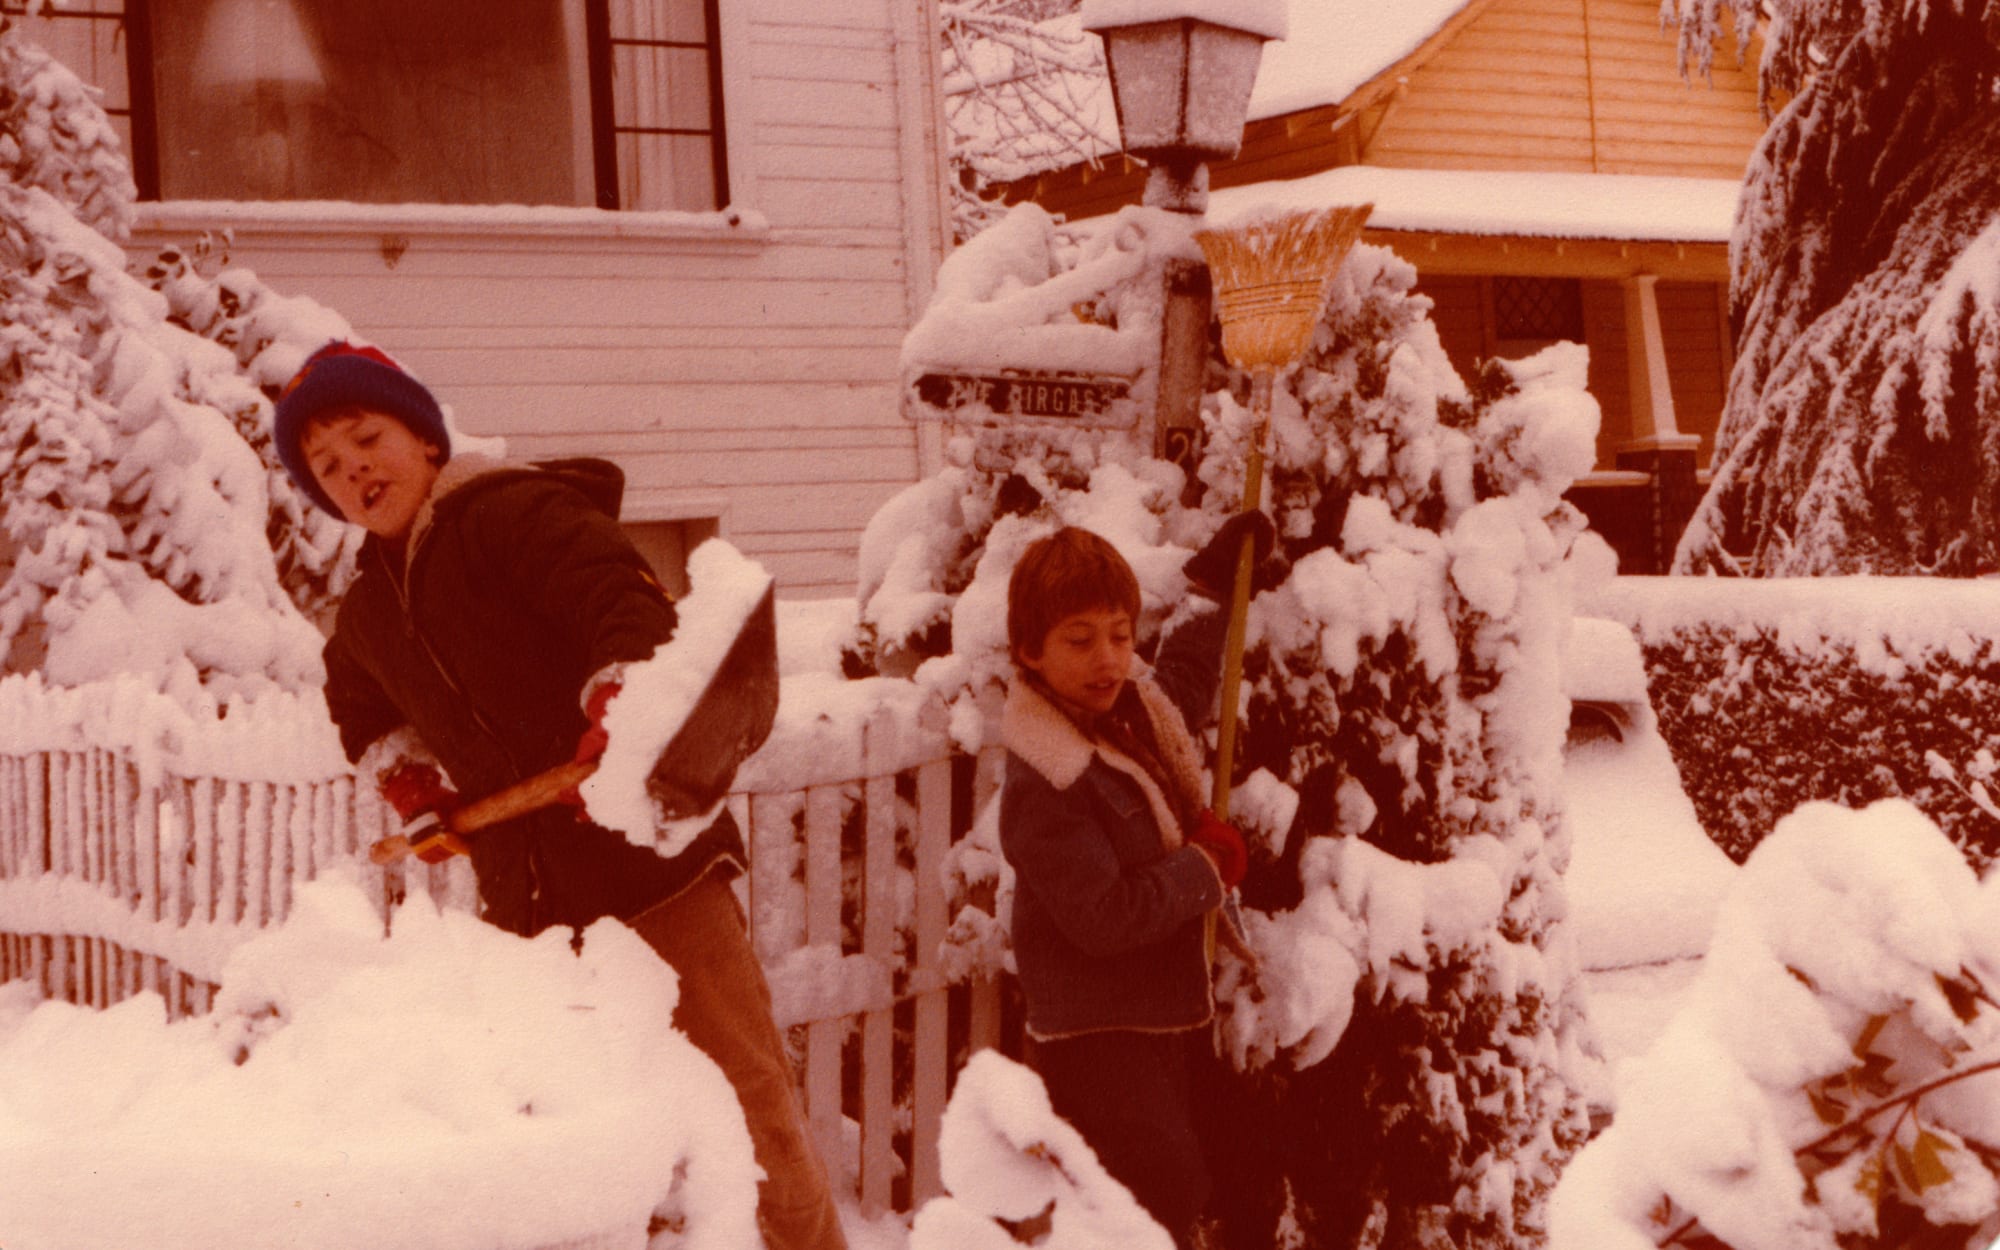 Nik Dirga as a child shovelling snow outside his family home in Nevada County